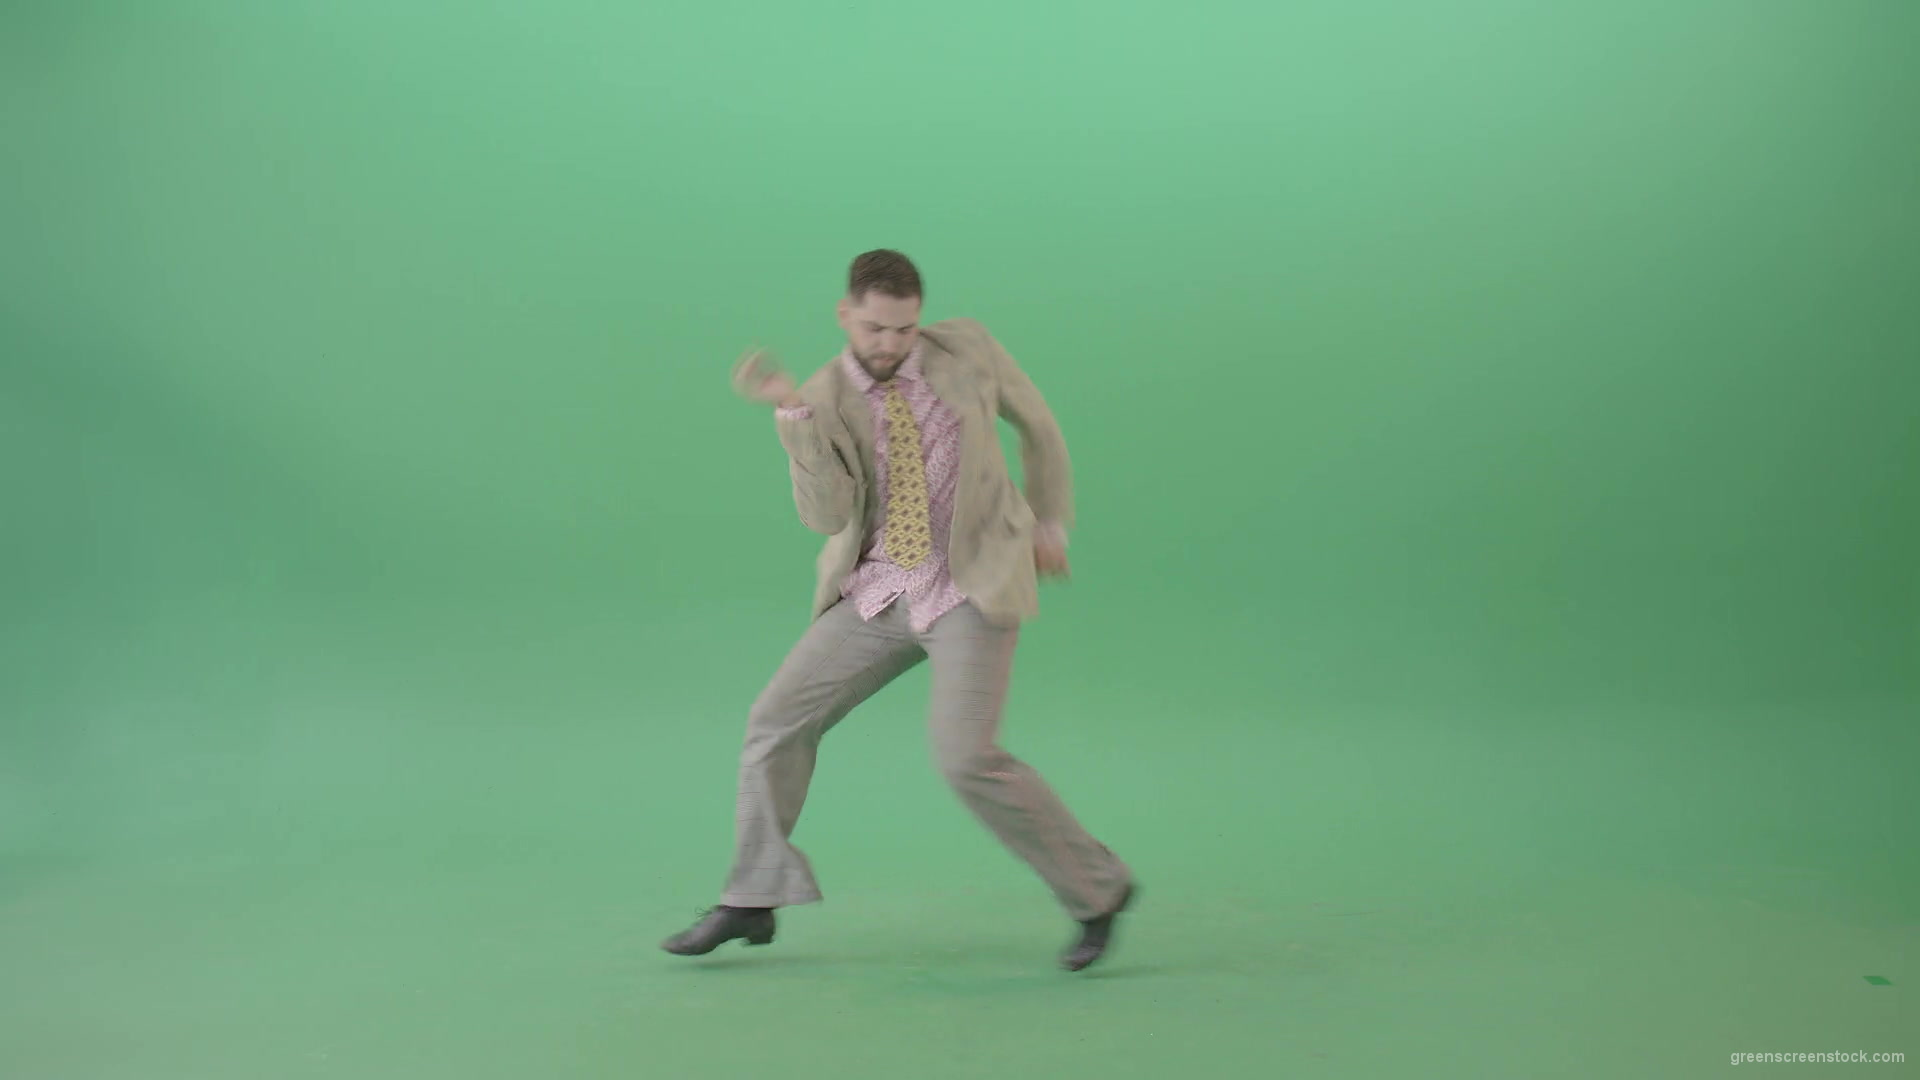 Man-dancing-shuffle-jazz-swing-Boogie-woogie-and-jumping-isolated-over-Green-Screen-4K-Video-Footage-1920_004 Green Screen Stock